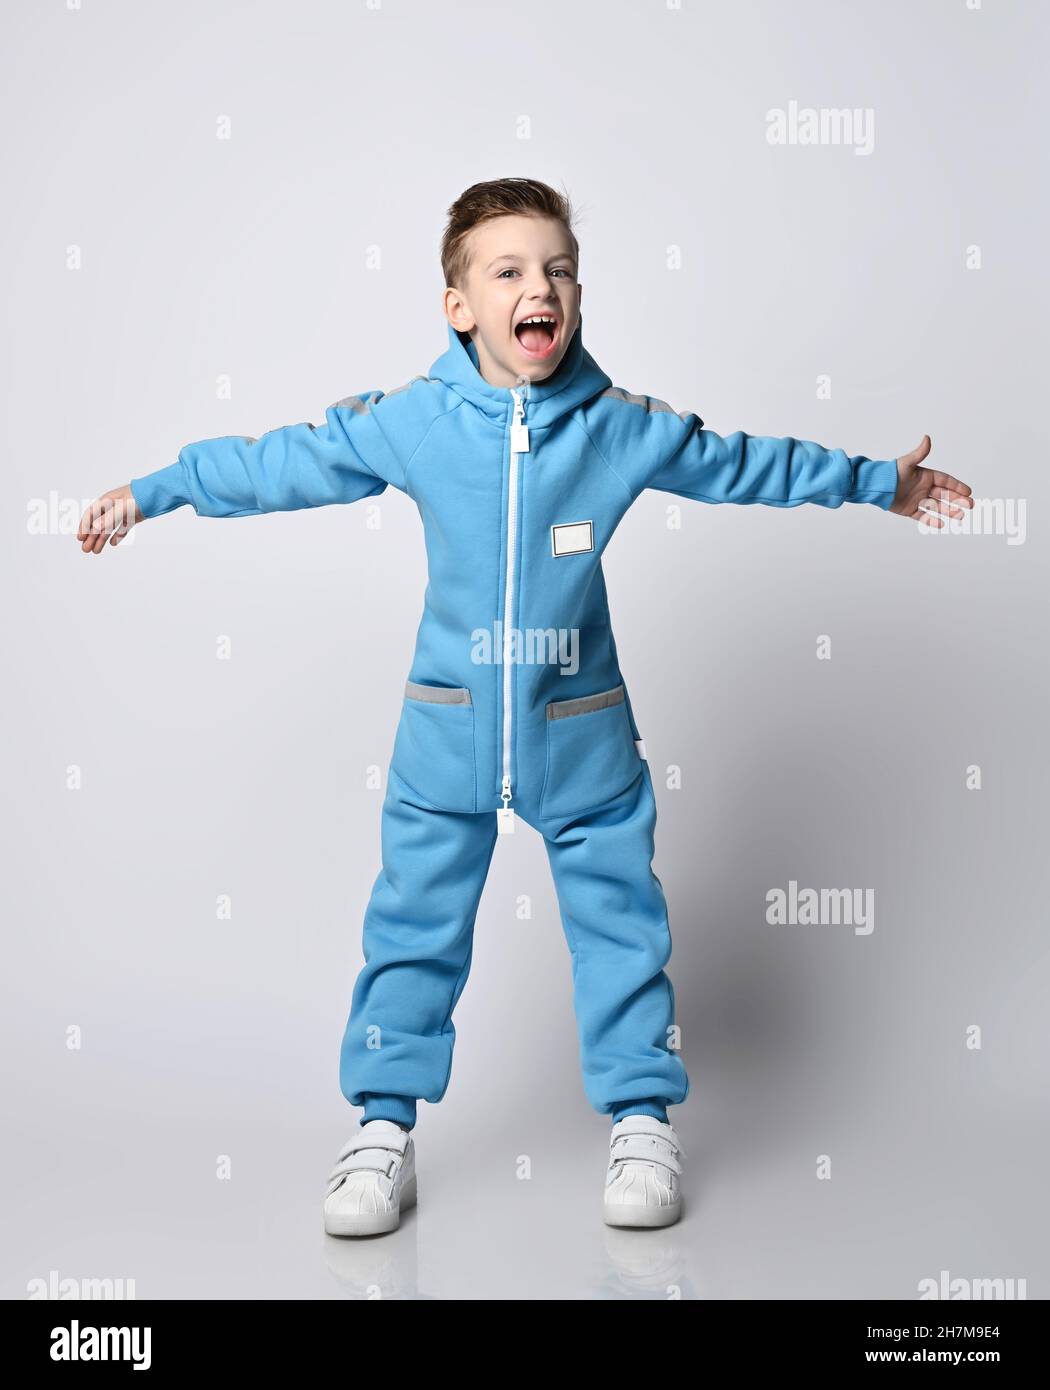 Frolic kid boy in blue jumpsuit with zipper and pockets stands holding arms wide apart and scream loudly Stock Photo